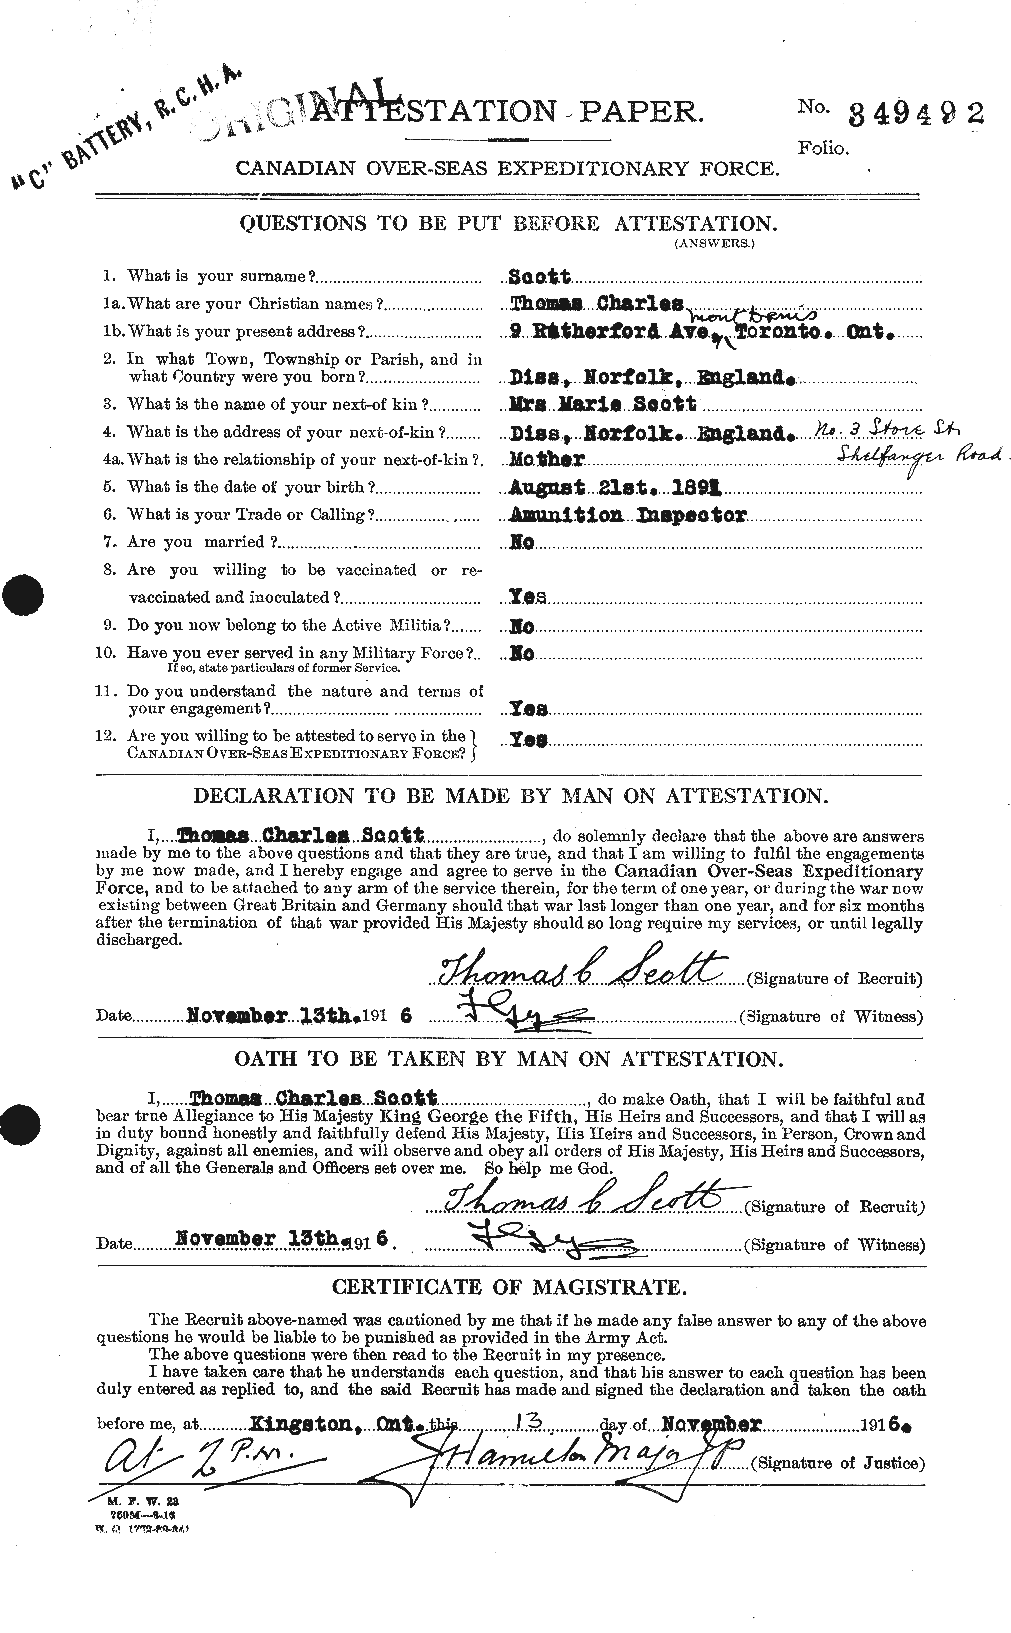 Personnel Records of the First World War - CEF 088520a